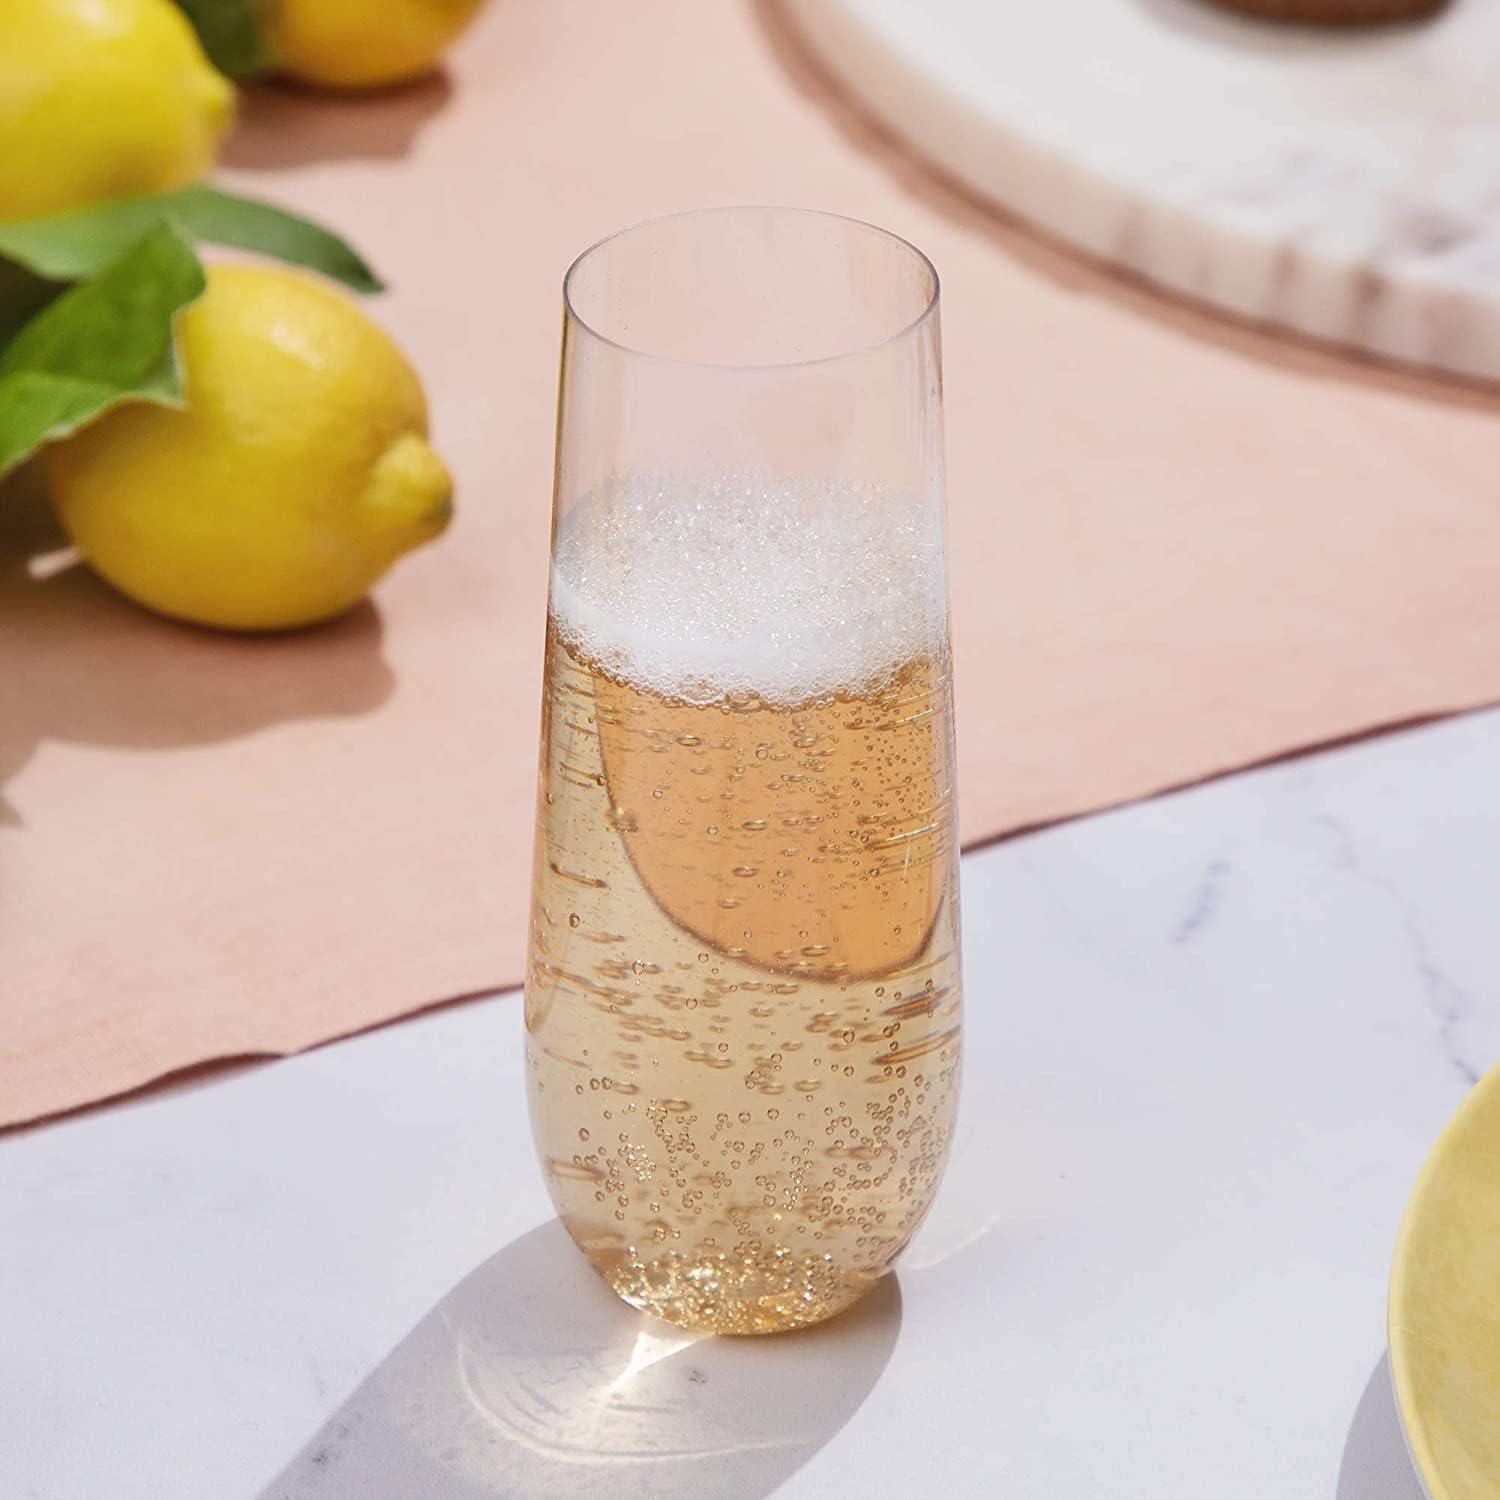 36 Pack Stemless Plastic Champagne Flutes Disposable 9 Oz Clear